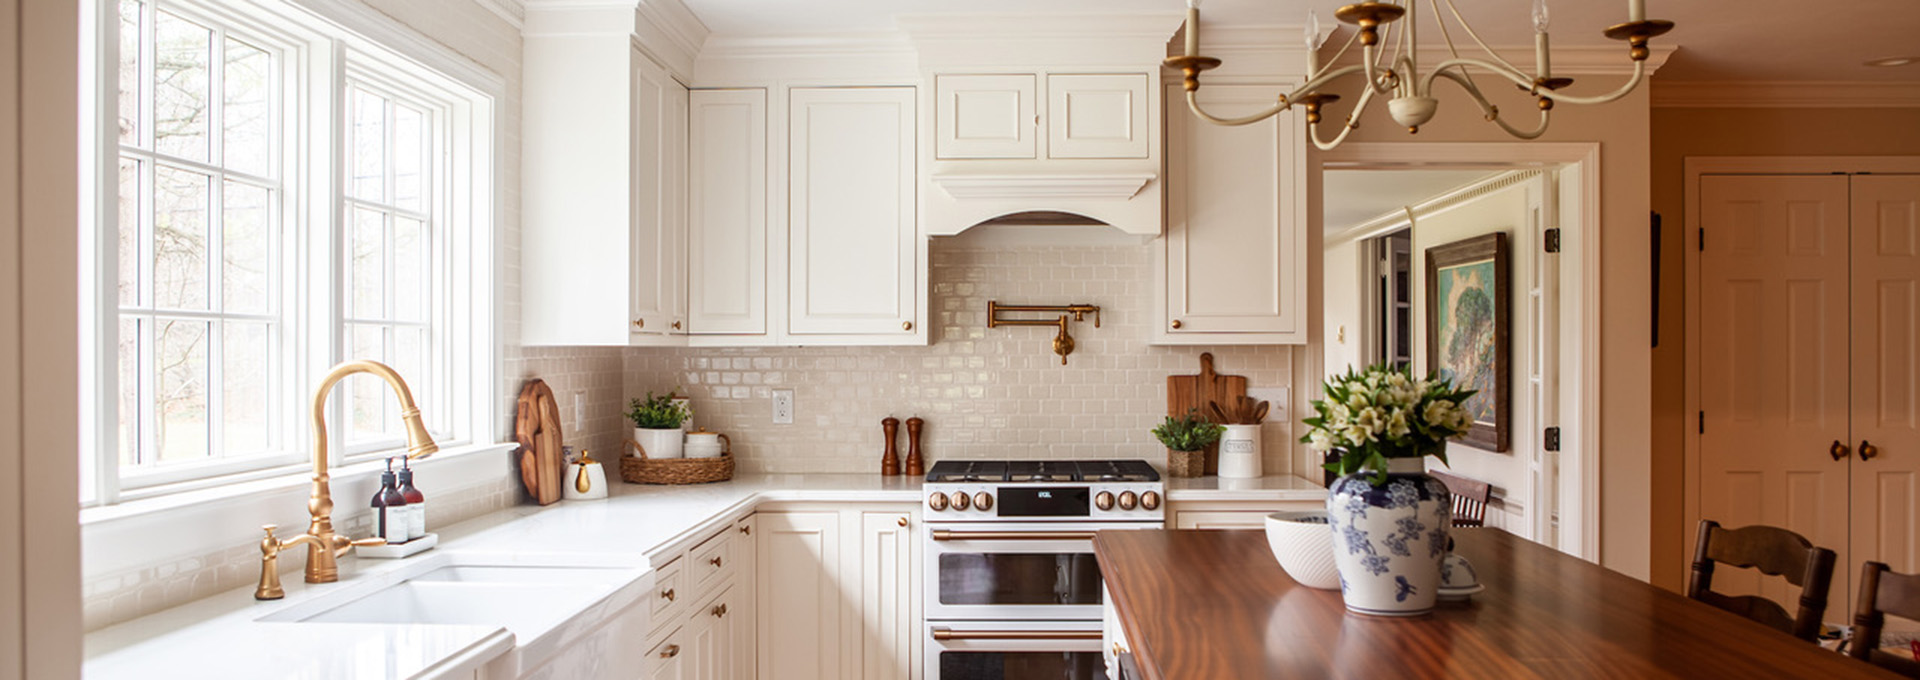 Traditional Countertops